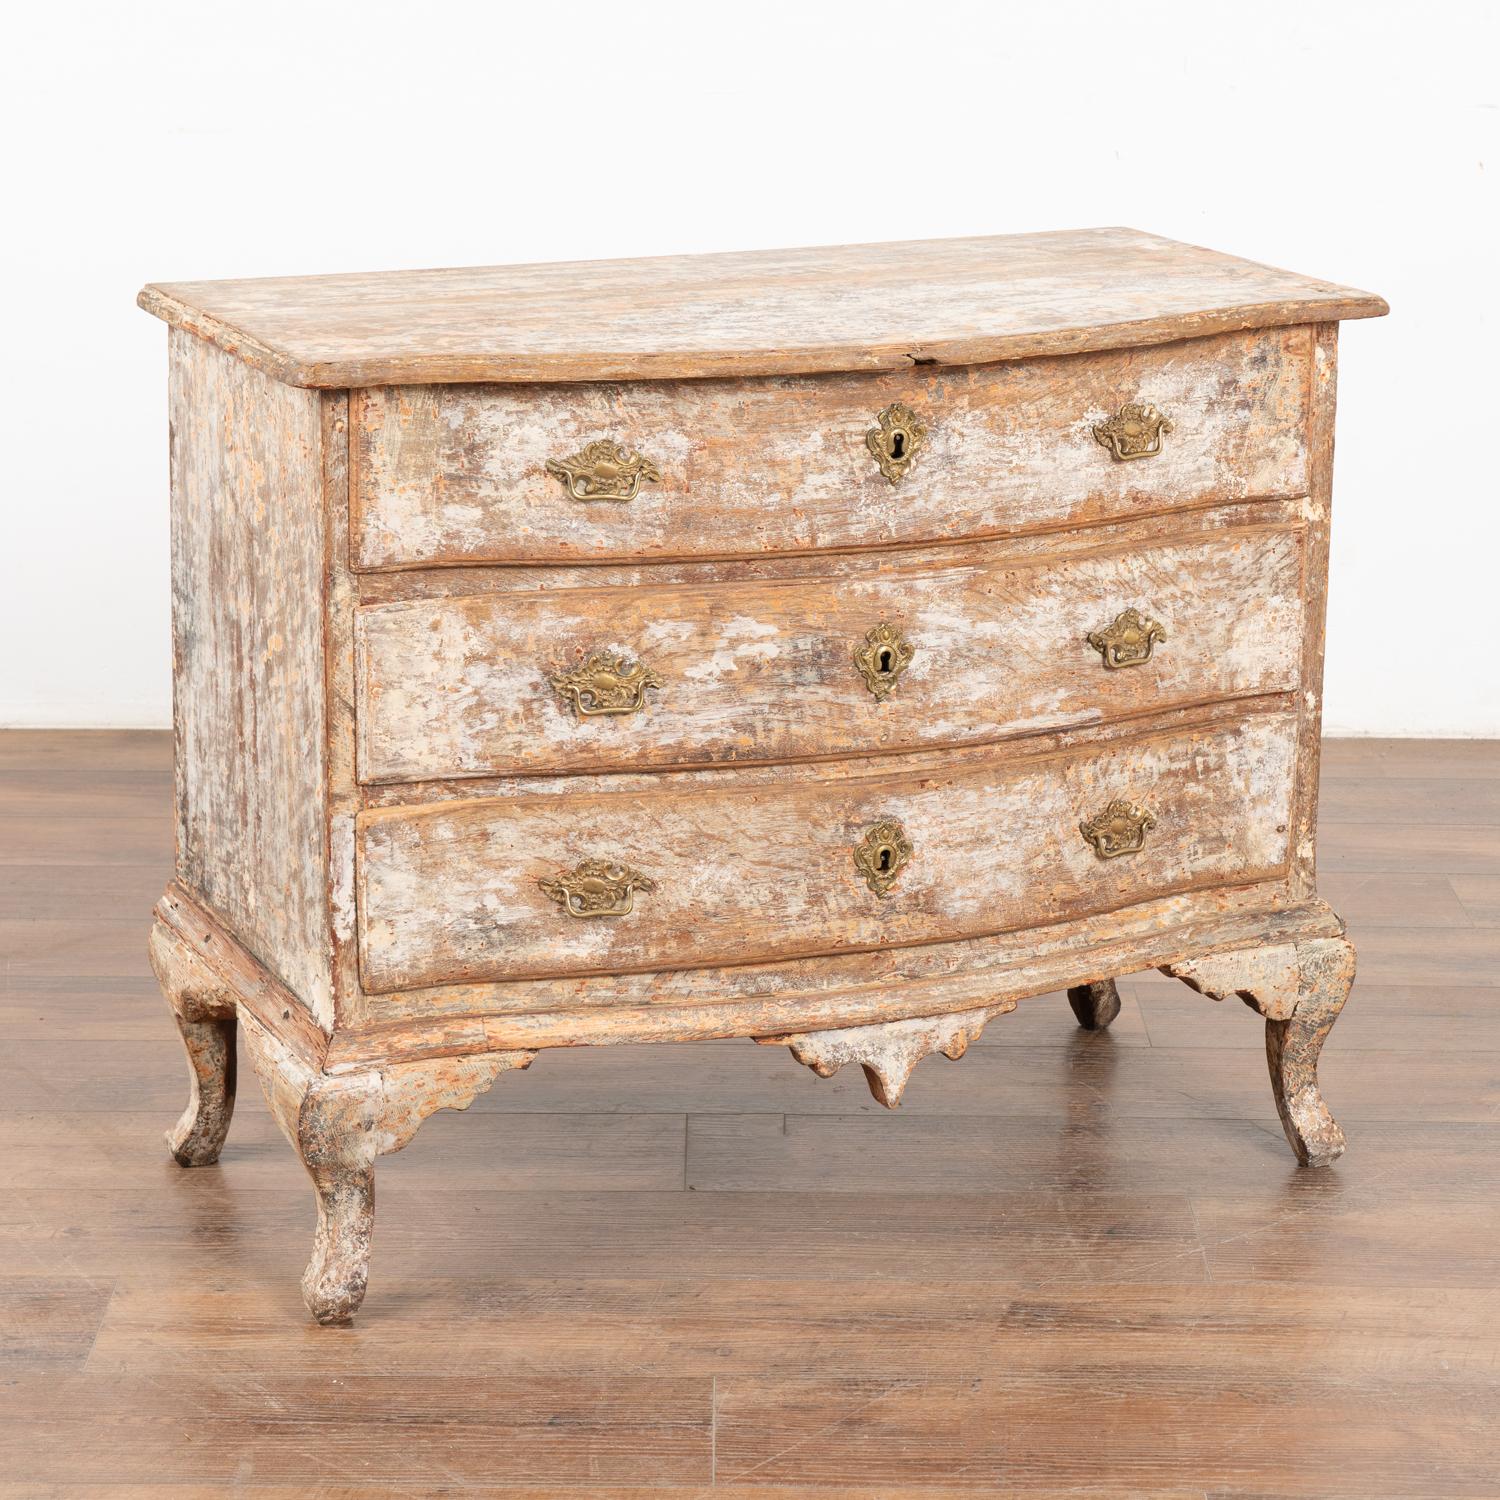 The enticing curves of the drawers and cabriolet feet create the strong visual appeal in this pine chest of three drawers.
Restored, the white painted finish has been scraped throughout to fit the age and grace of this lovely dresser.
All scratches,